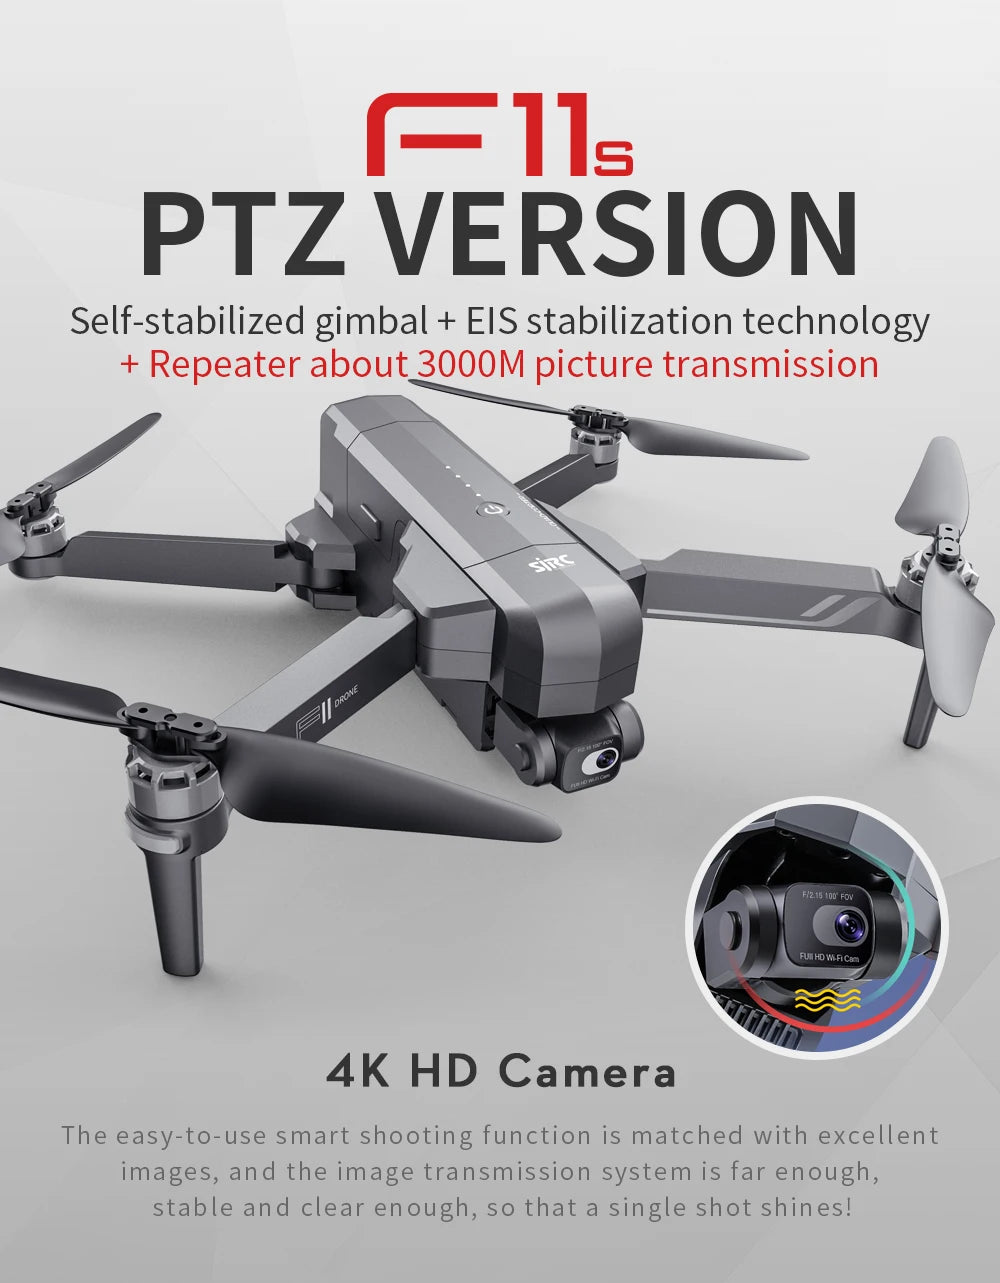 F11S PRO Drone, self-stabilized gimbal + EIS stabilization technology Repeater about 3000